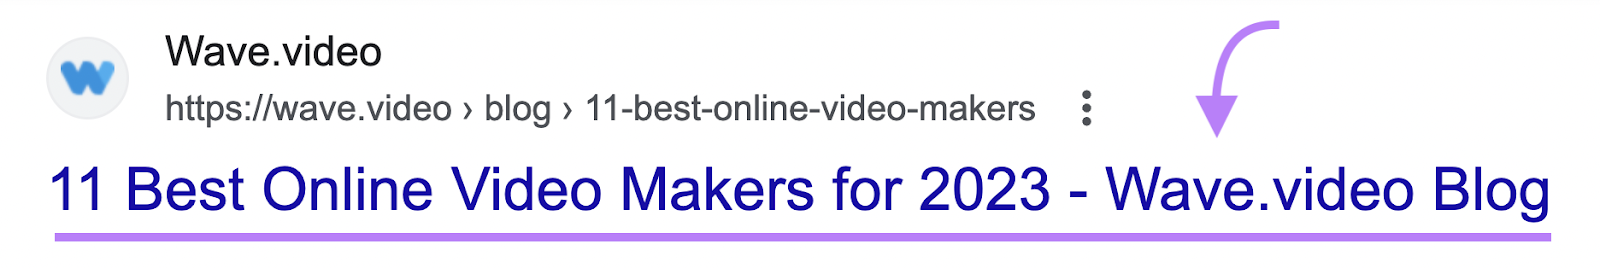 Wave.video’s article title "11 Best Online Video Makers for 2023" on SERP